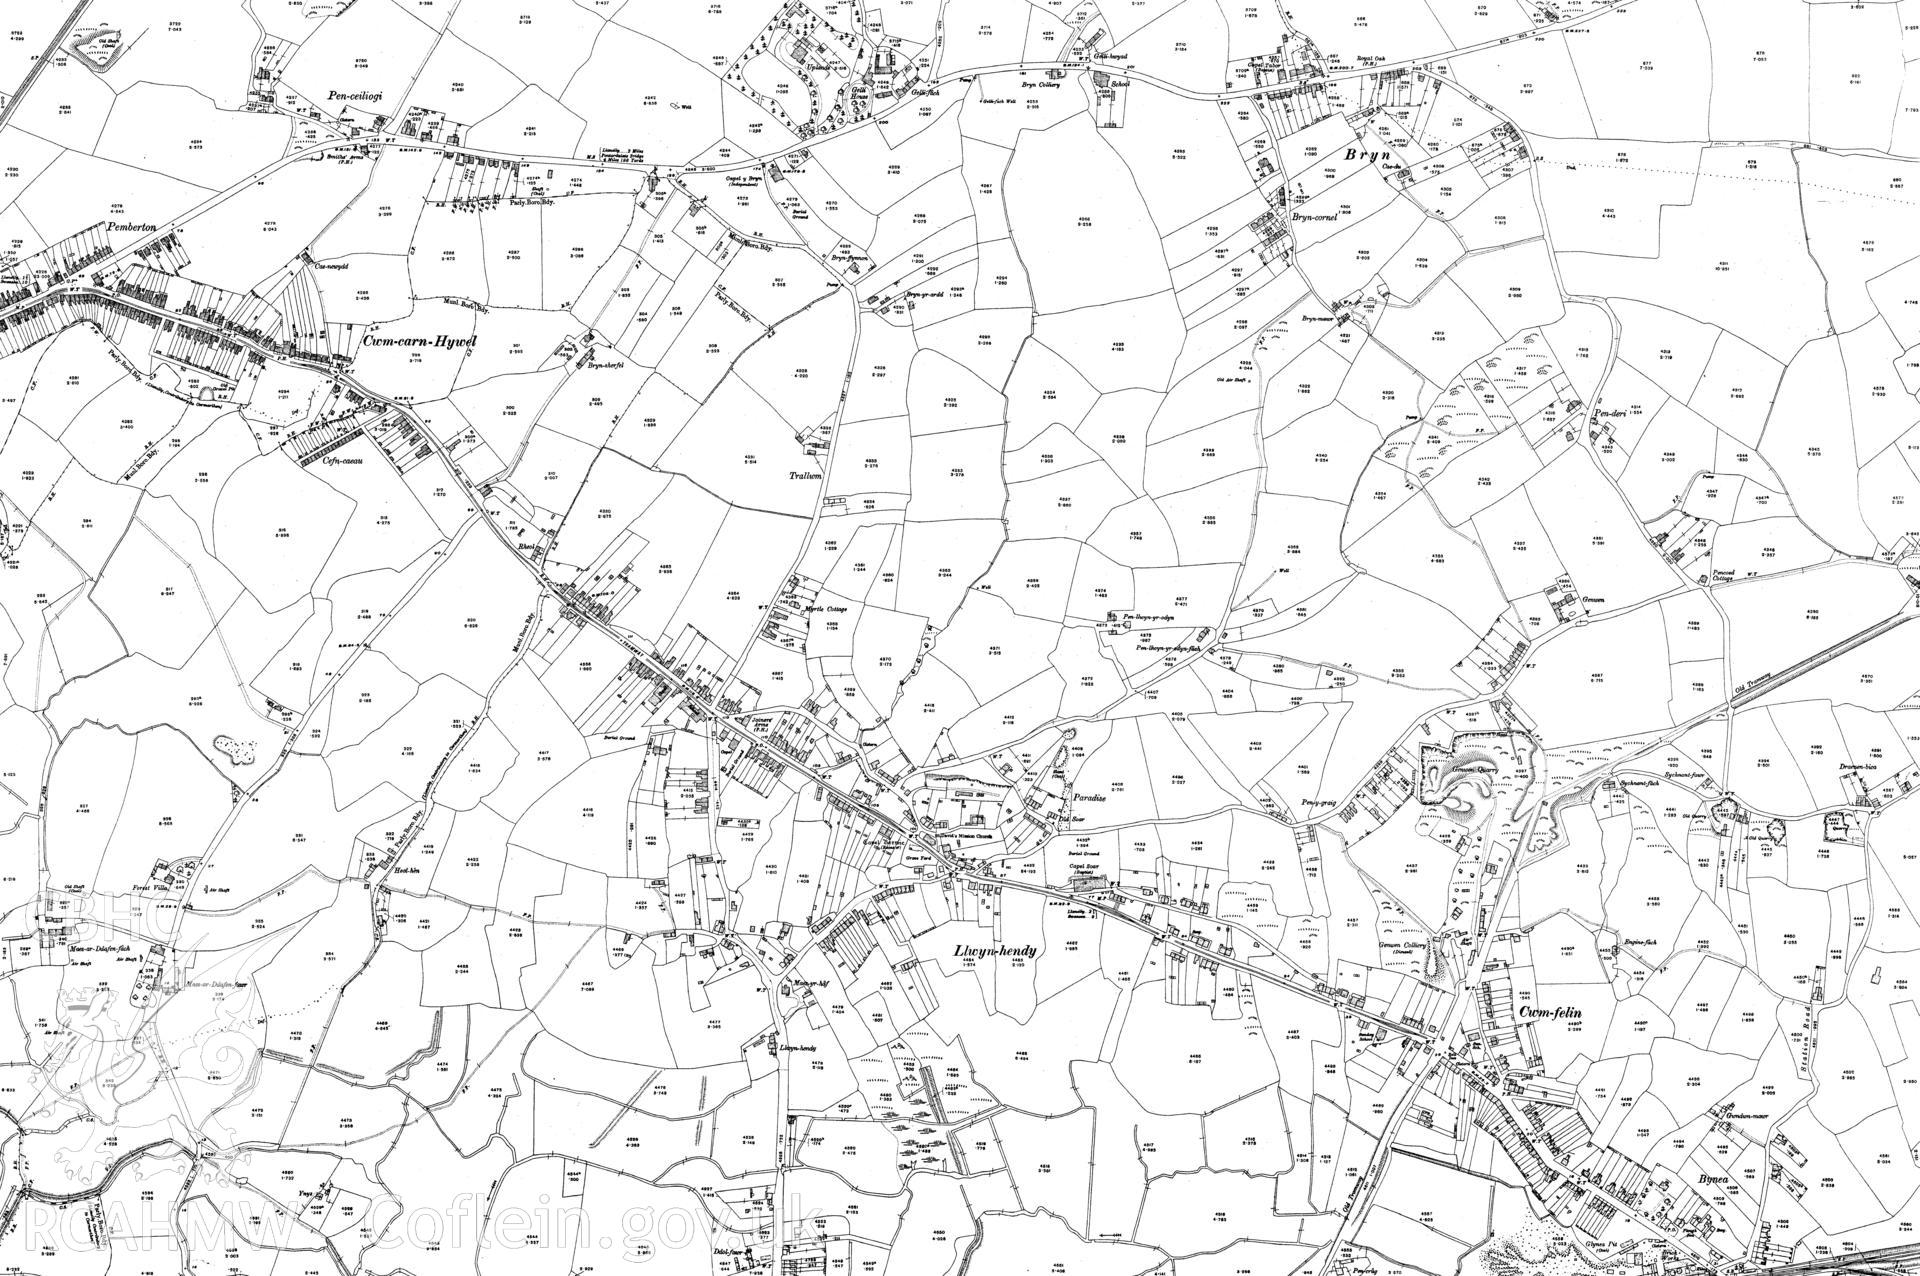 Third edition of 25 inch OS maps, published in 1916, reproduced by Landmark Information Group, showing the area around Bynea. Map included as part of archaeological appraisal of Gwndwn Mawr, Station Rd., Bynea, Carmarthenshire, 2014.